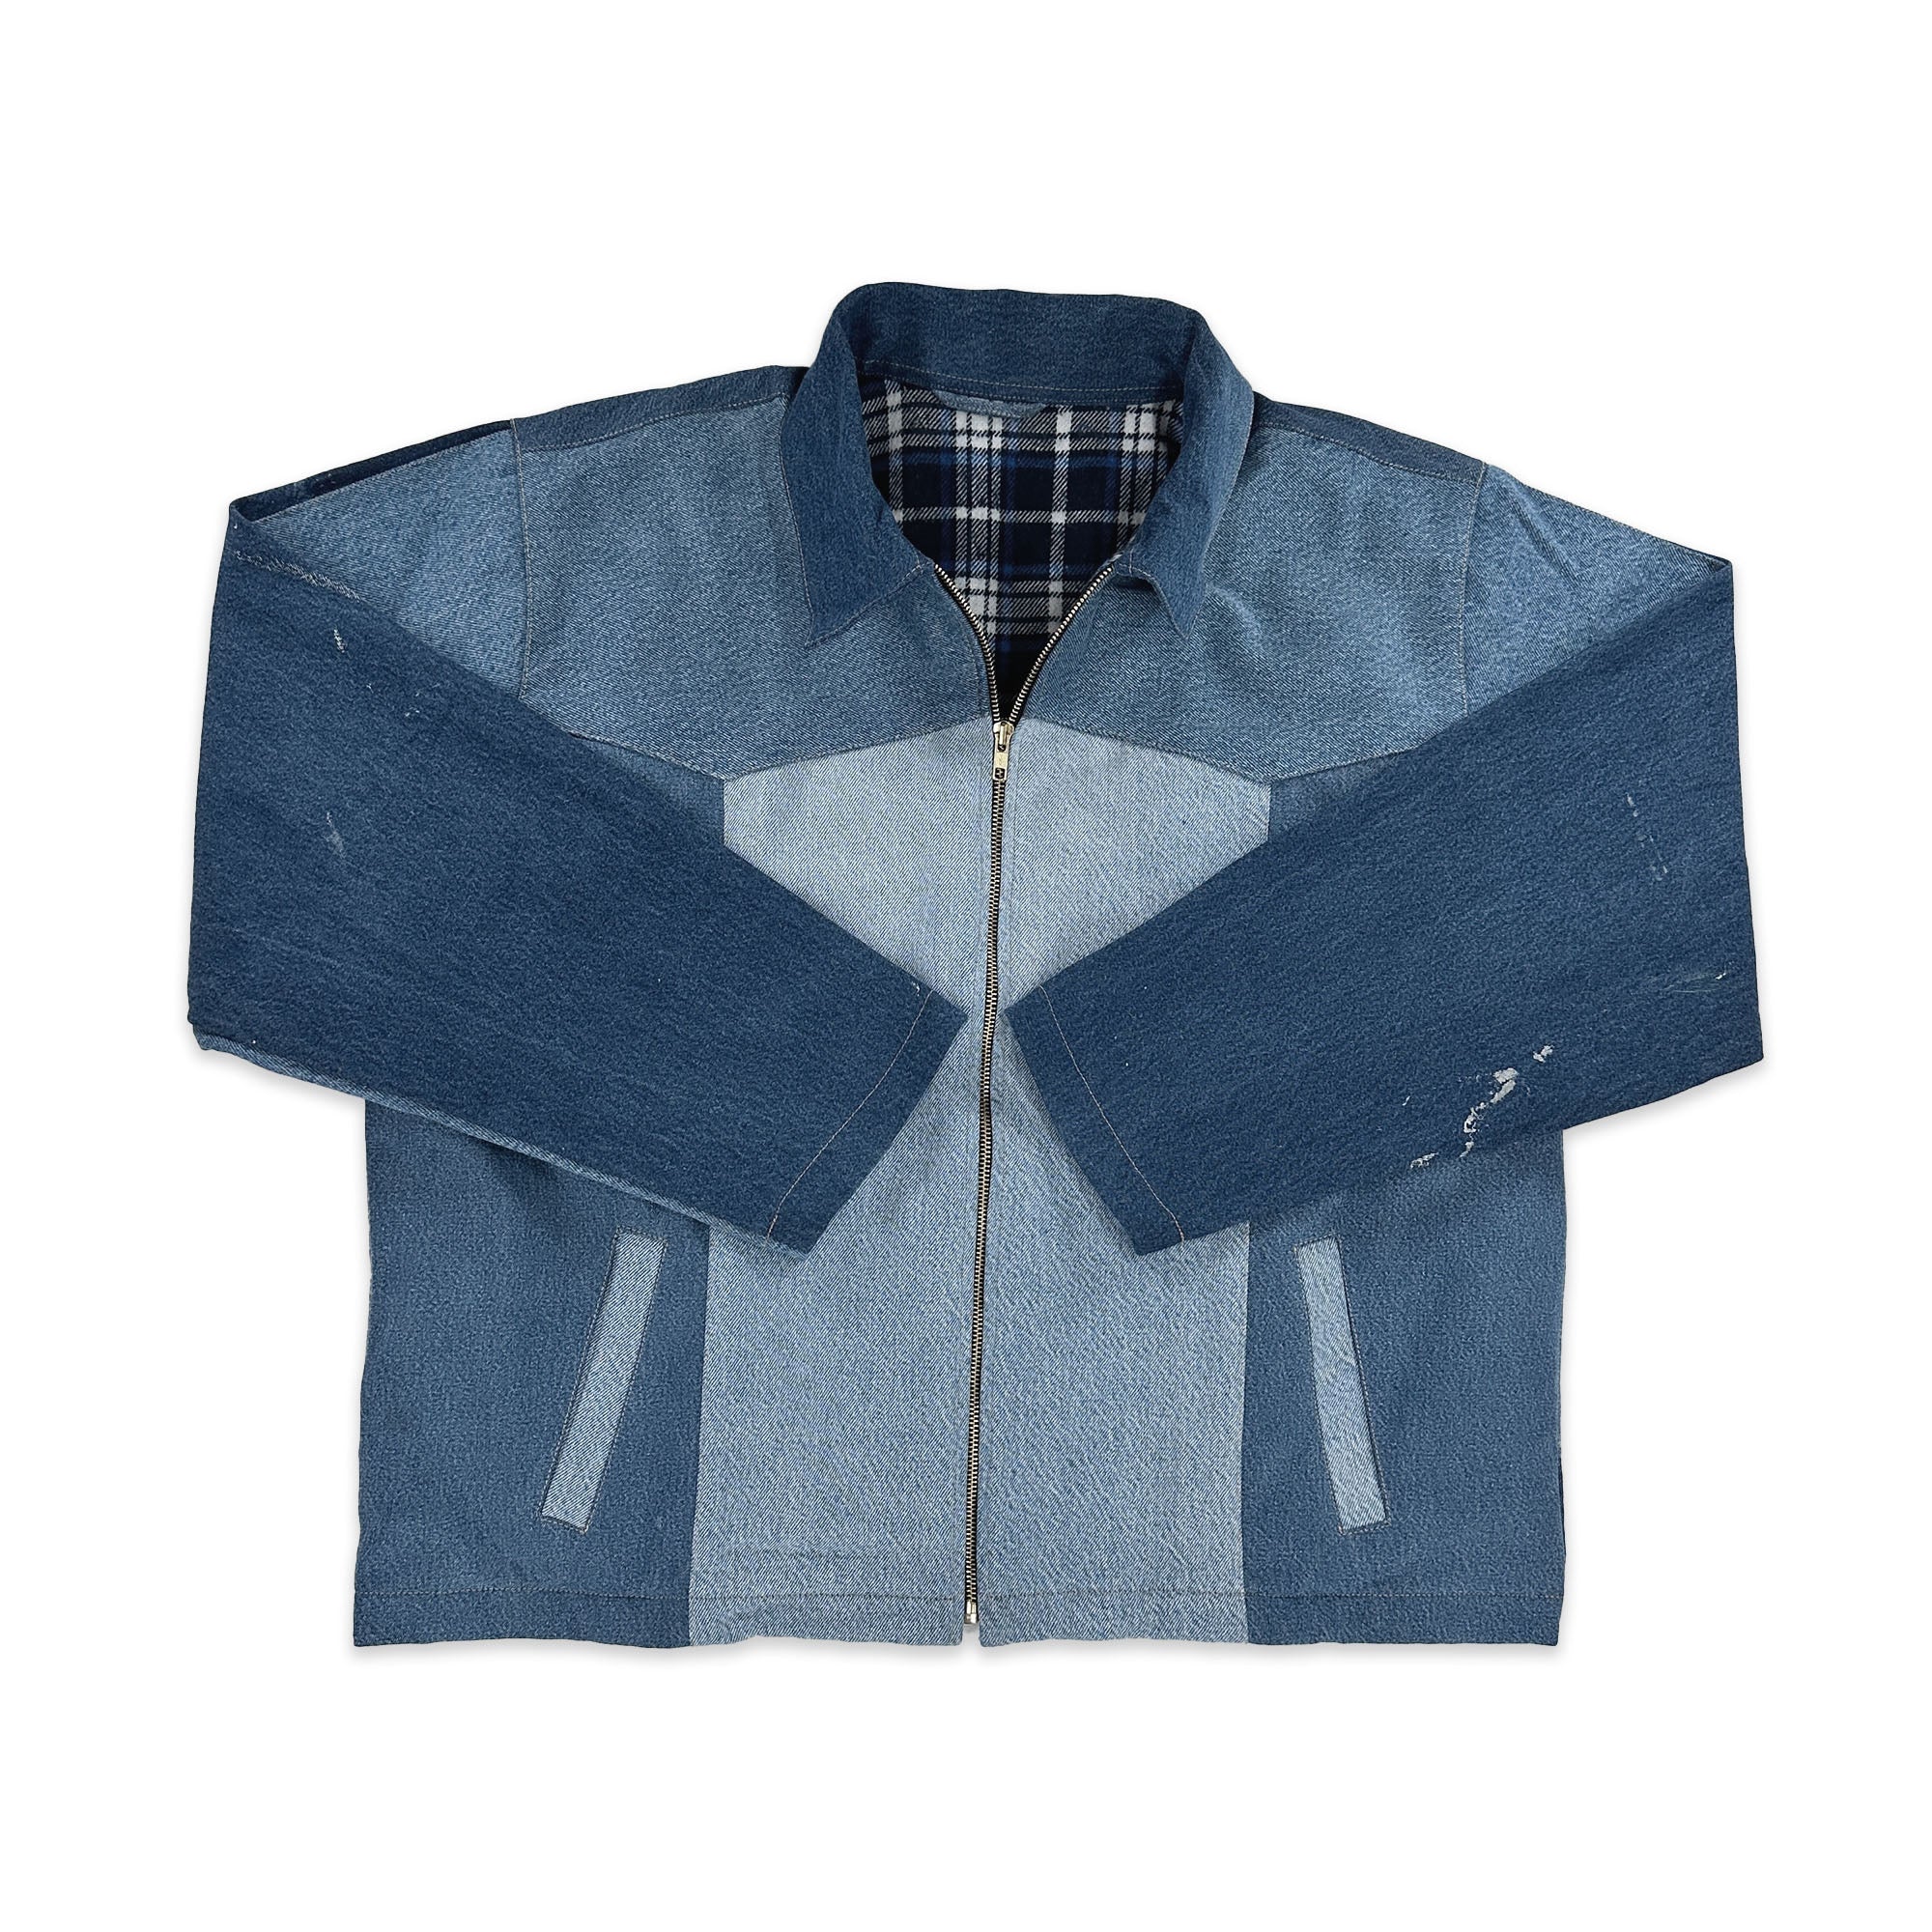 Chore Coat Made From Upcycled Work Jeans - L/XL Great Lakes Reclaimed Denim